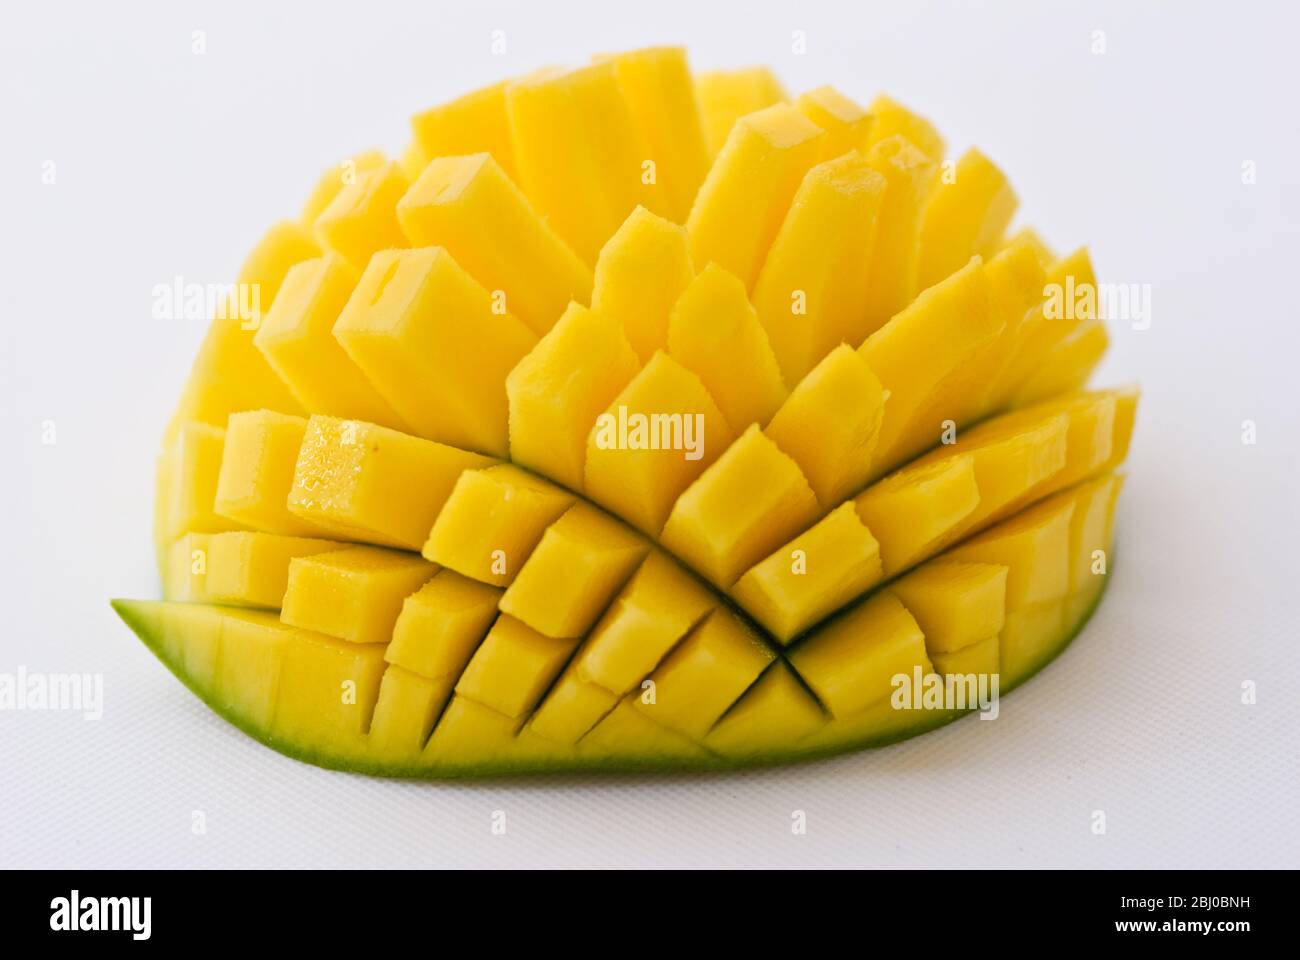 Fresh mango showing technique for cutting into cubes - Stock Photo